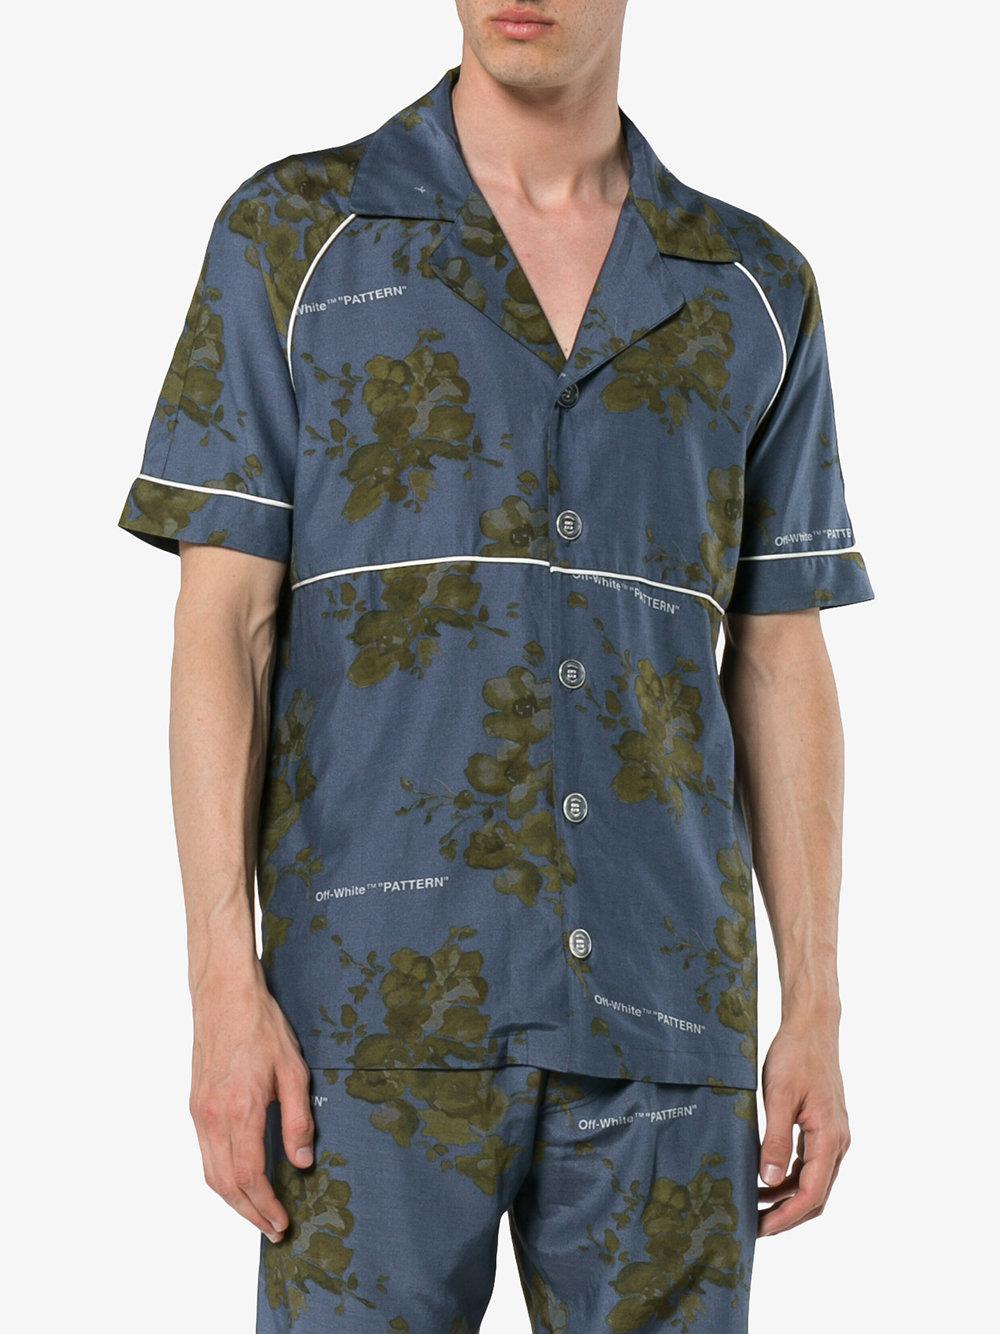 Off-White c/o Virgil Abloh X Browns Floral Print Cotton Shirt With Piping  for Men - Lyst